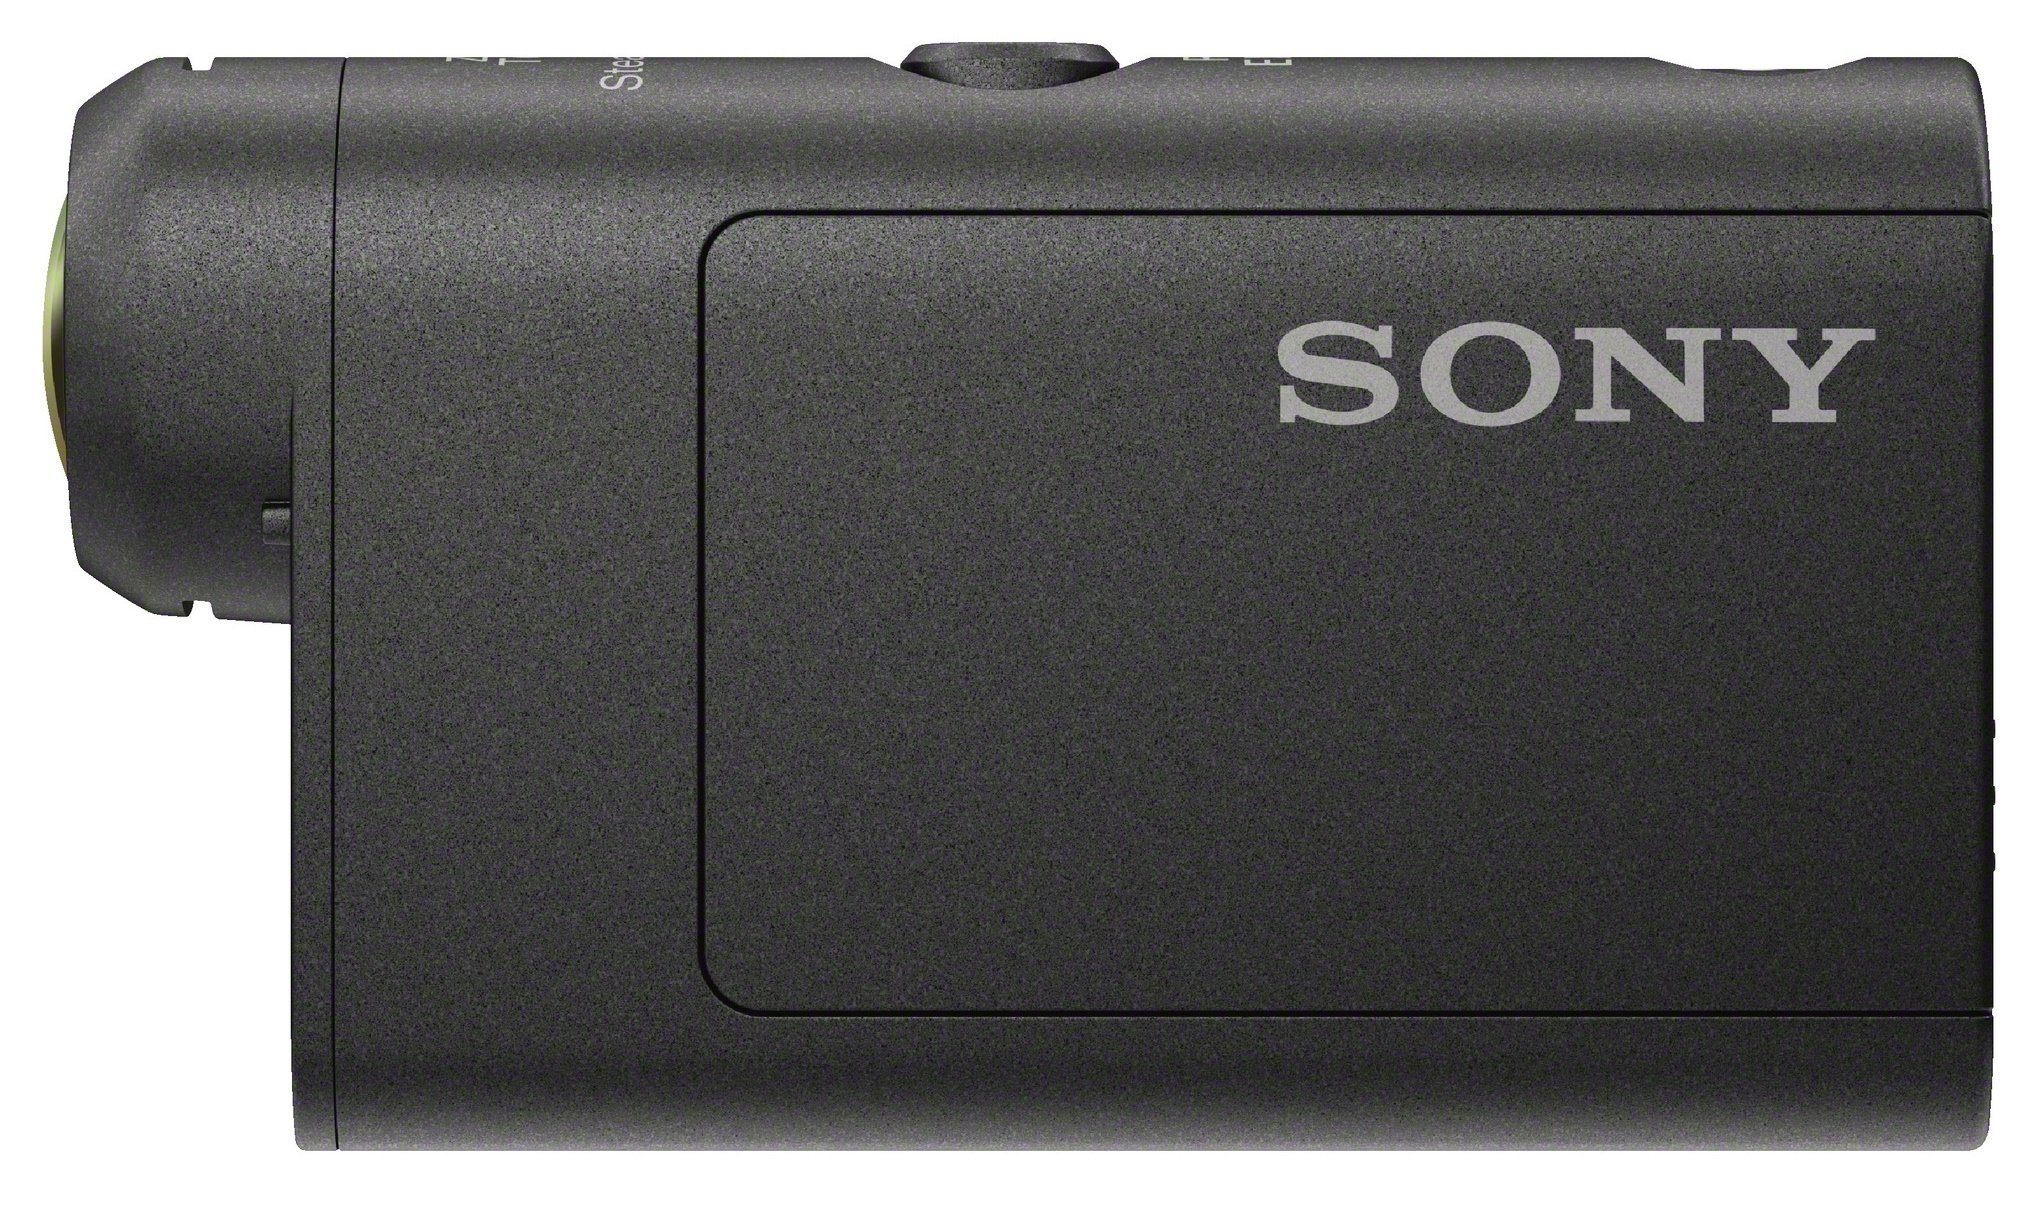 Sony HDR-AS50R Action Cam with Live-View Remote